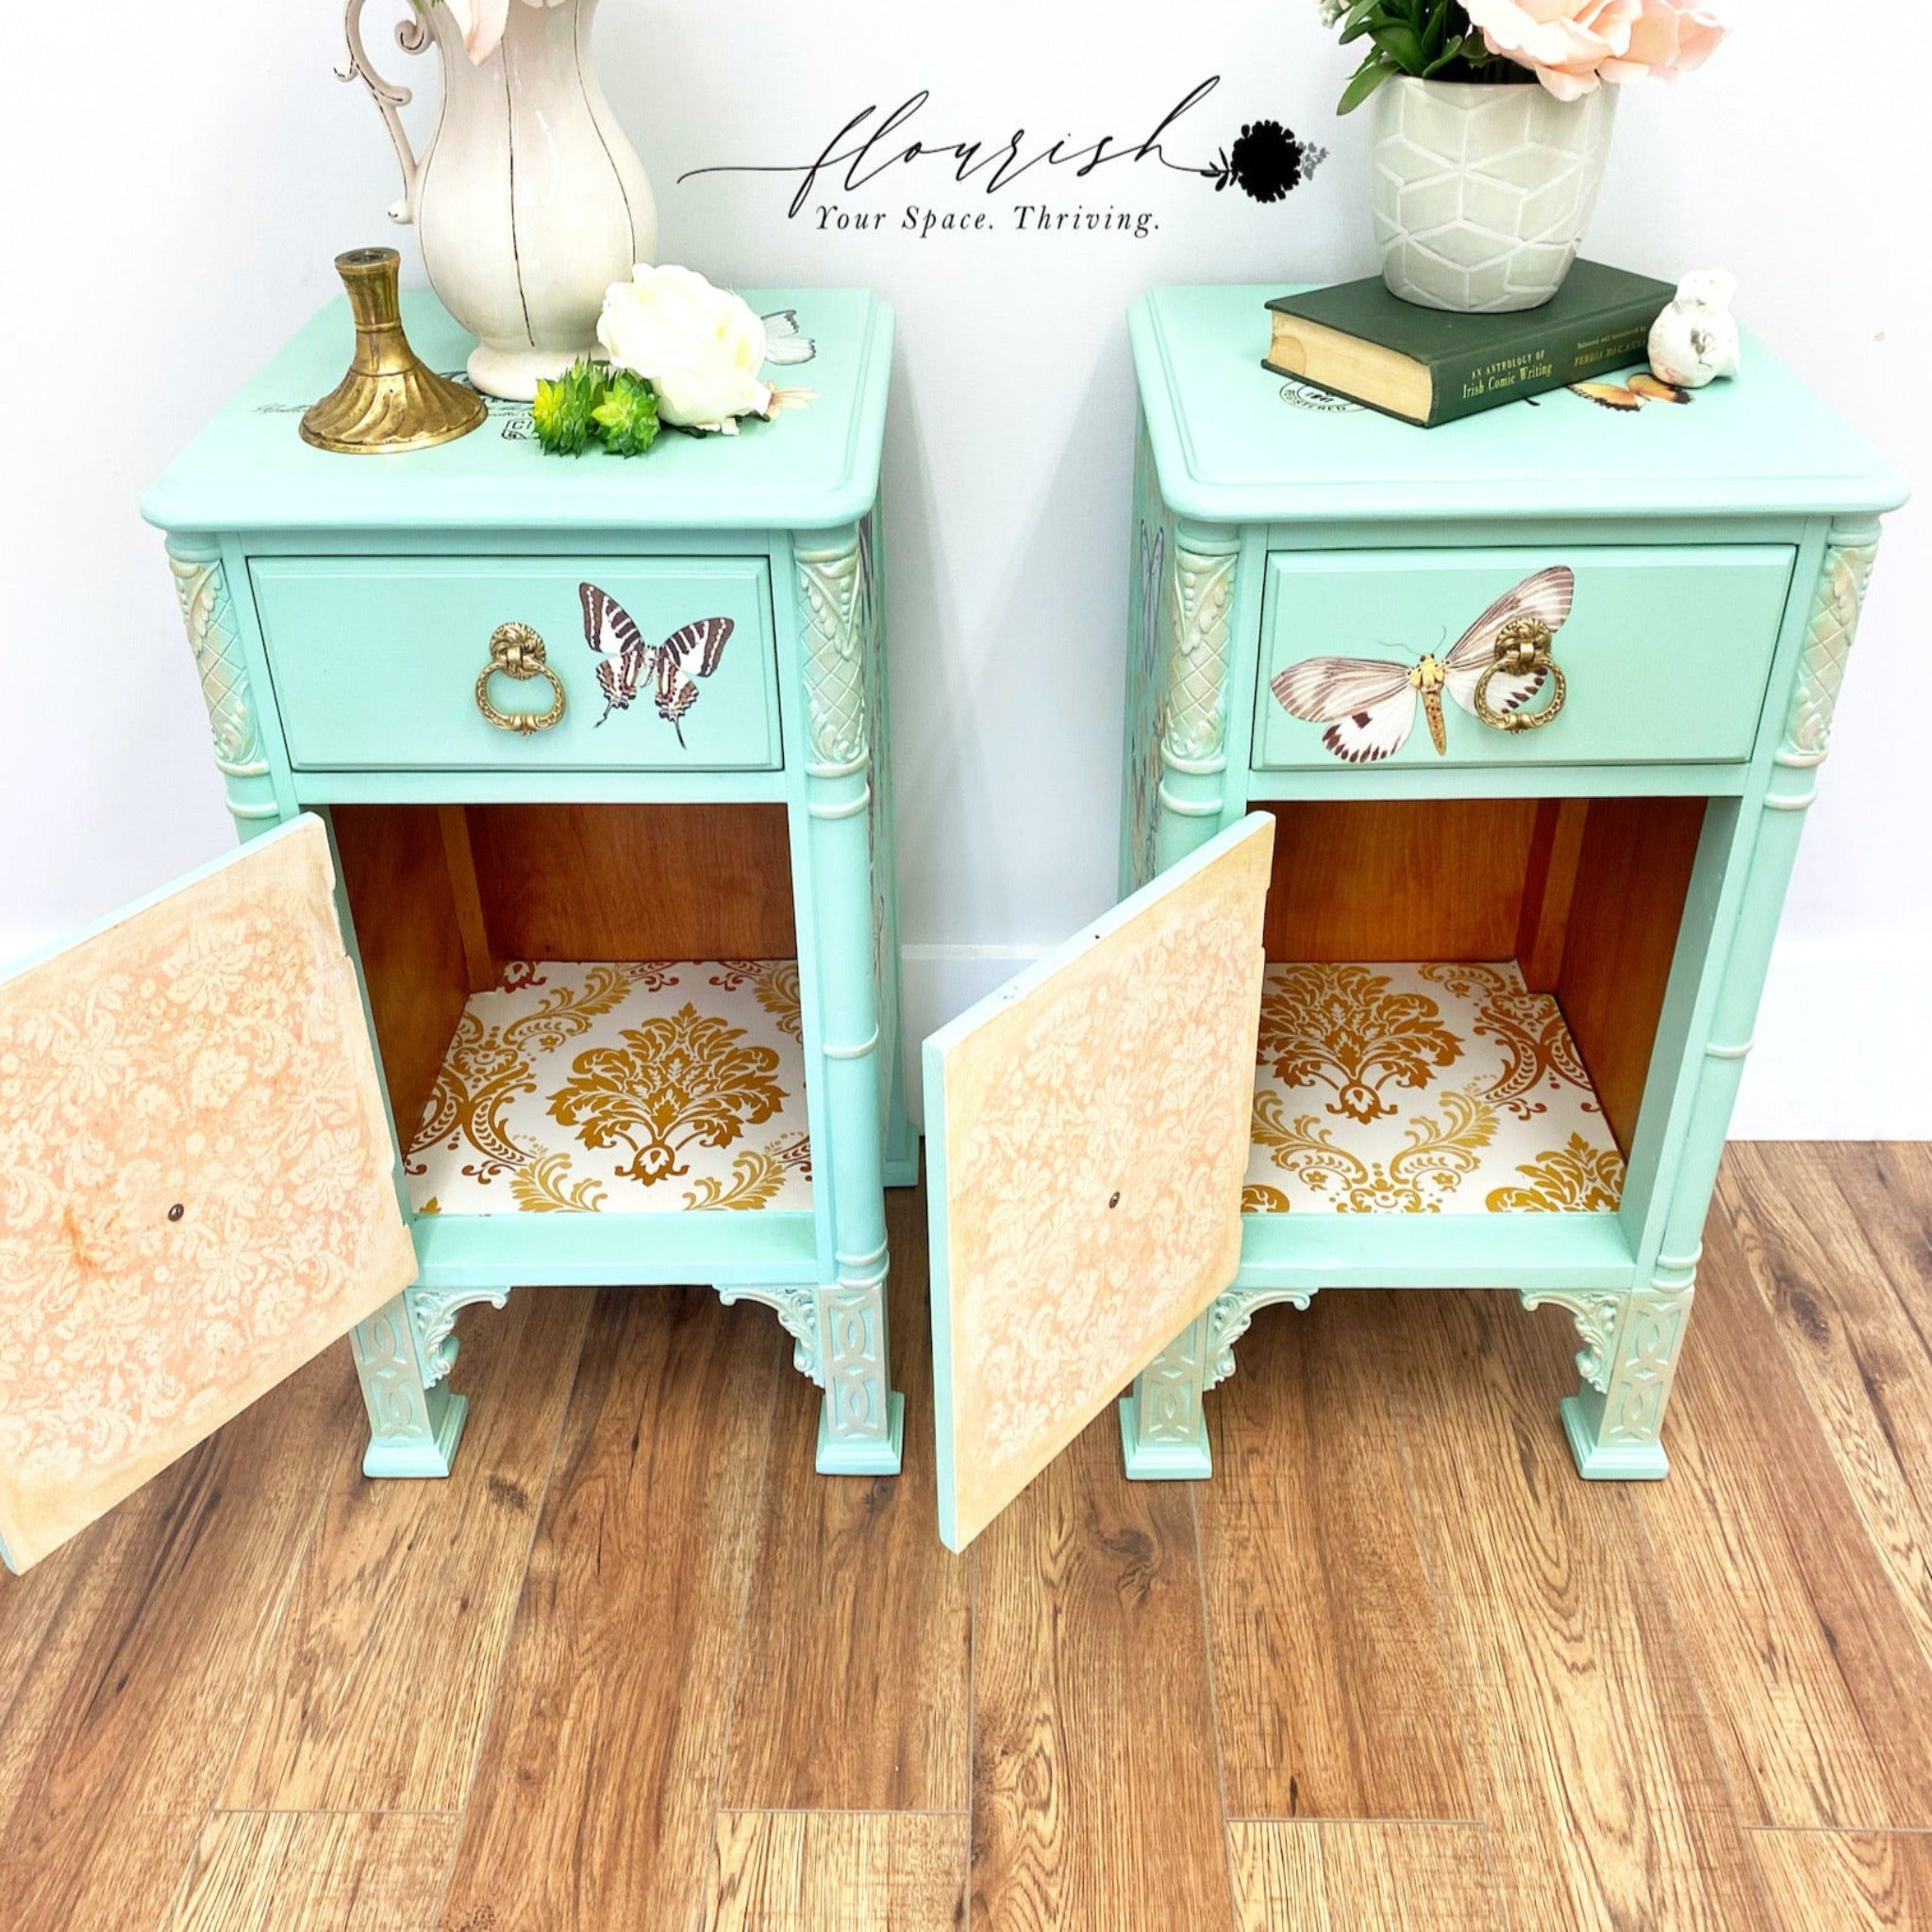 Two vintage night stands with a drawer and storage door refurbished by Flourish Your Space Thriving are painted mint green and feature ReDesign with Prima's Peach Damask tissue paper on the inside of the doors.